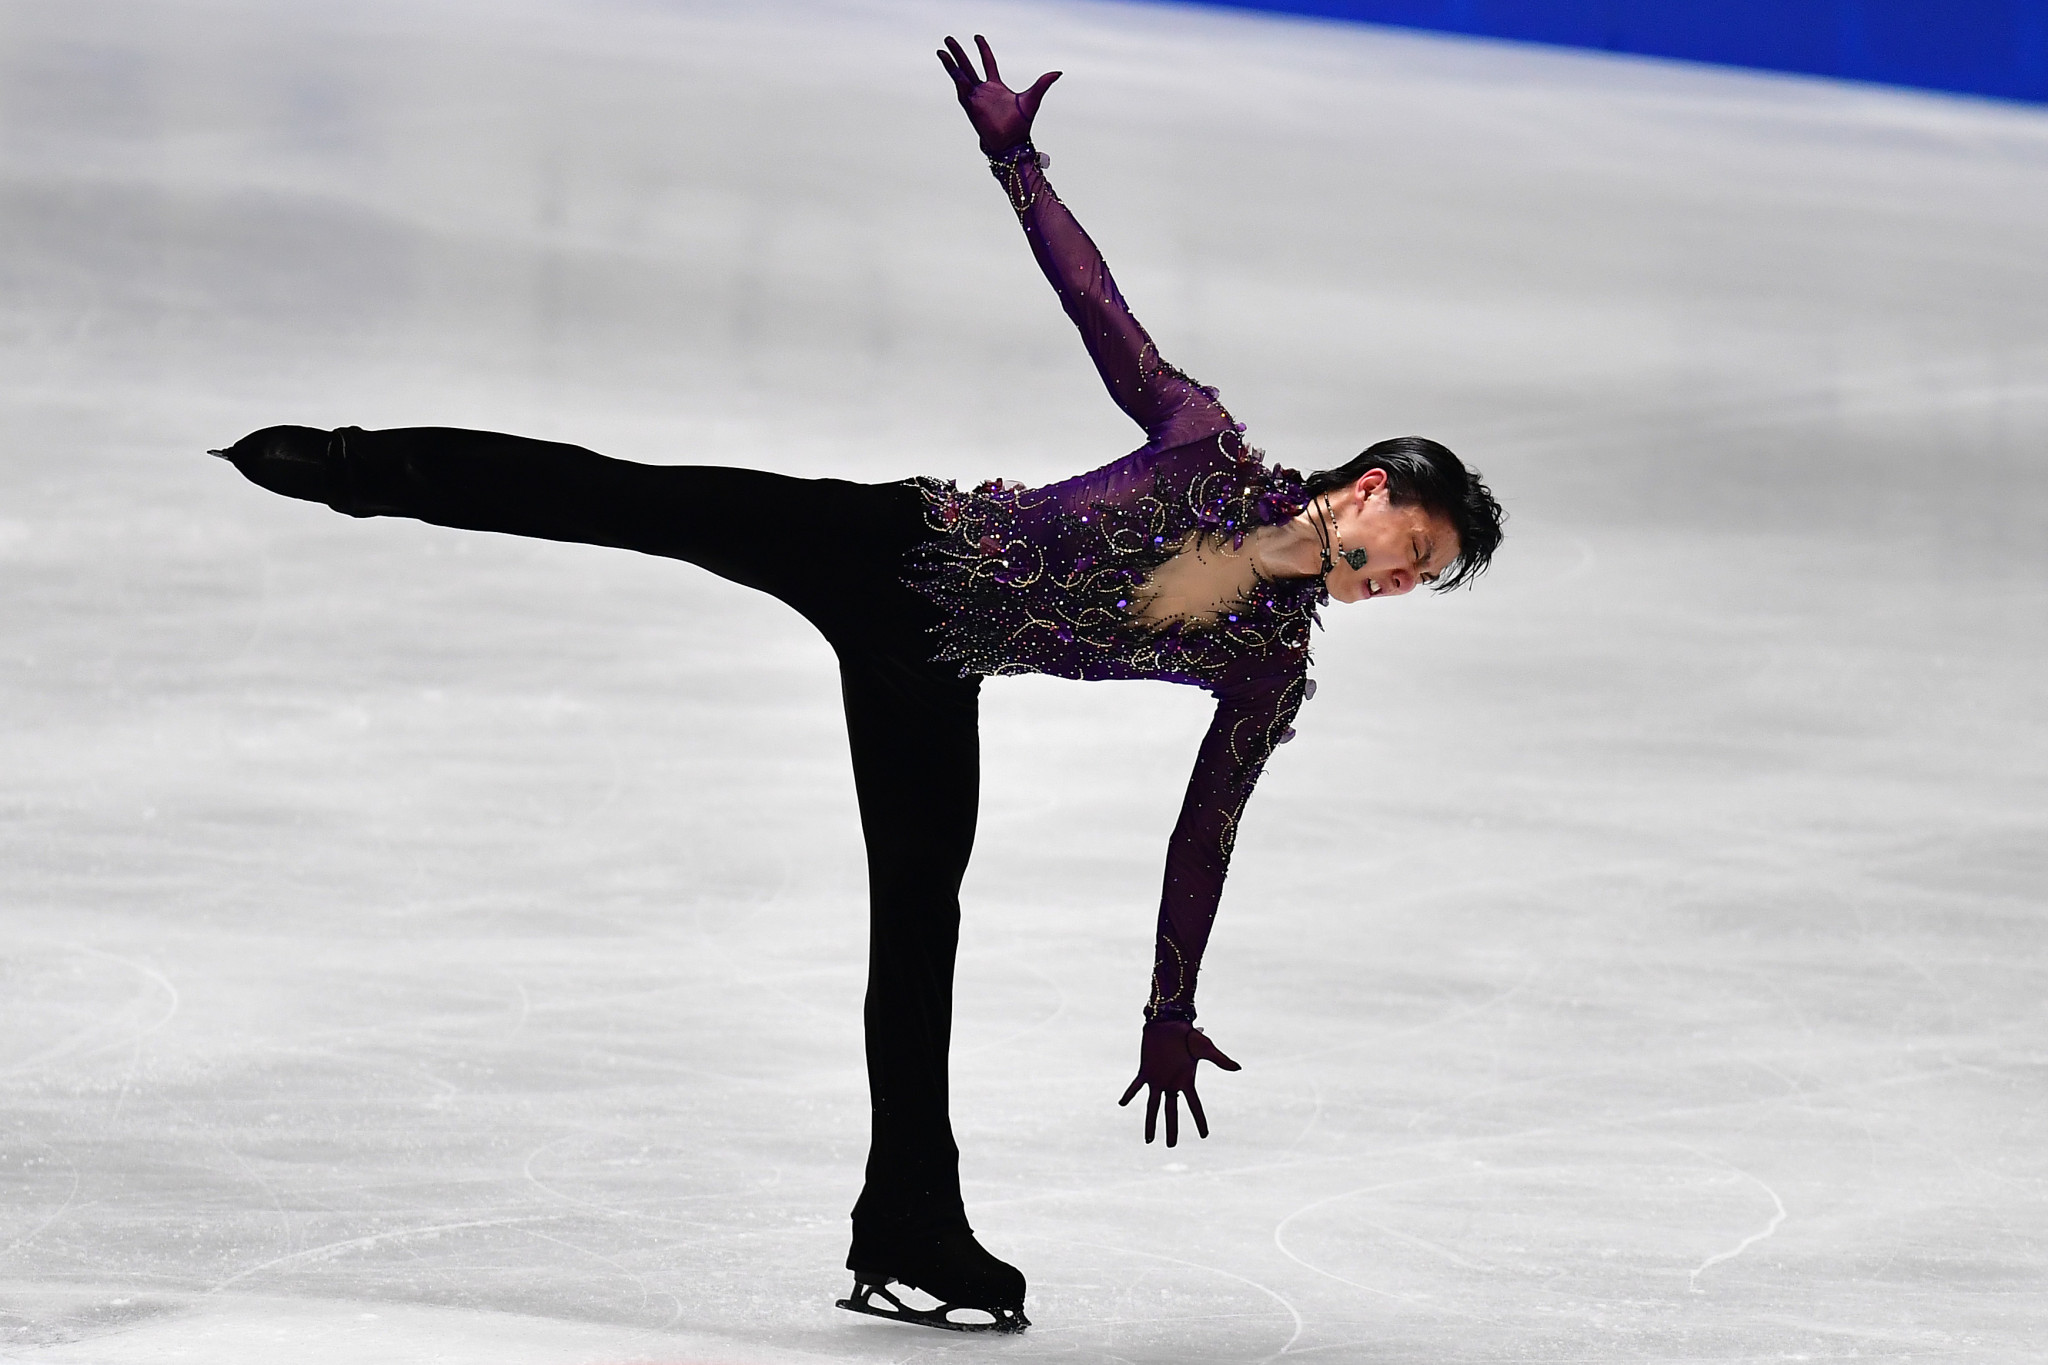 Yuzuru Hanyu has won the Grand Prix Final on four occasions, but last did so in 2016 ©Getty Images